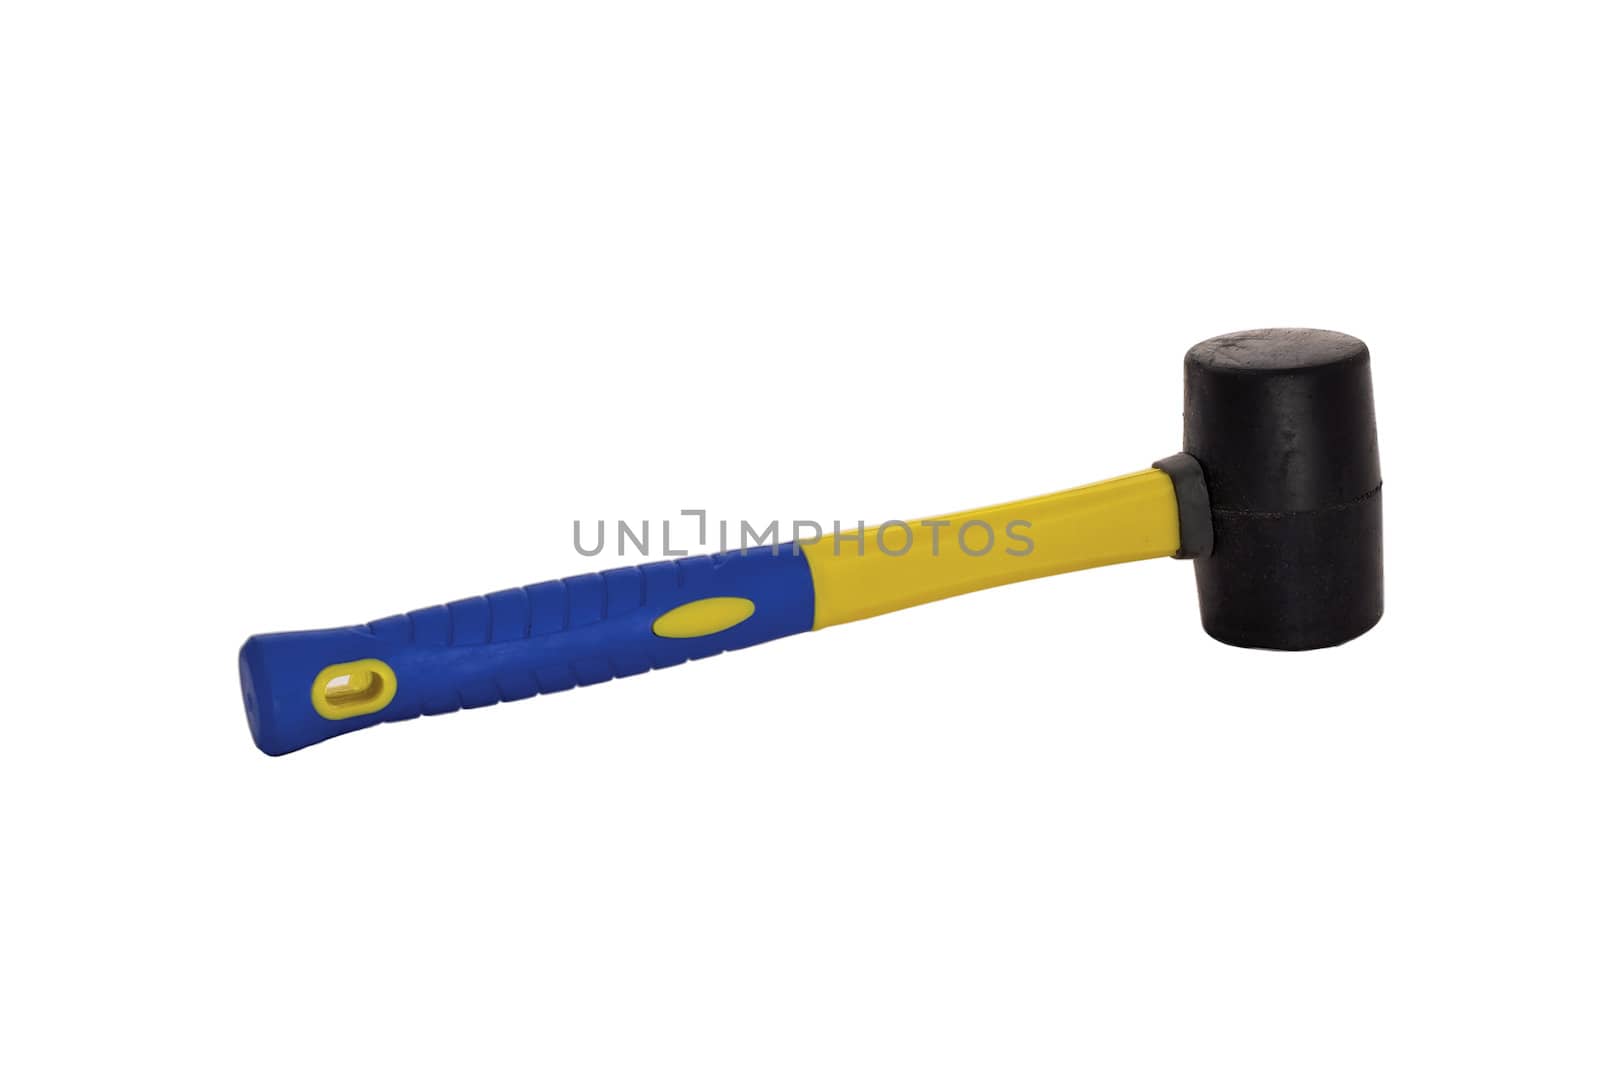 Isolated rubber mallet for use in DIY renovation, maintenance and construction on a white background